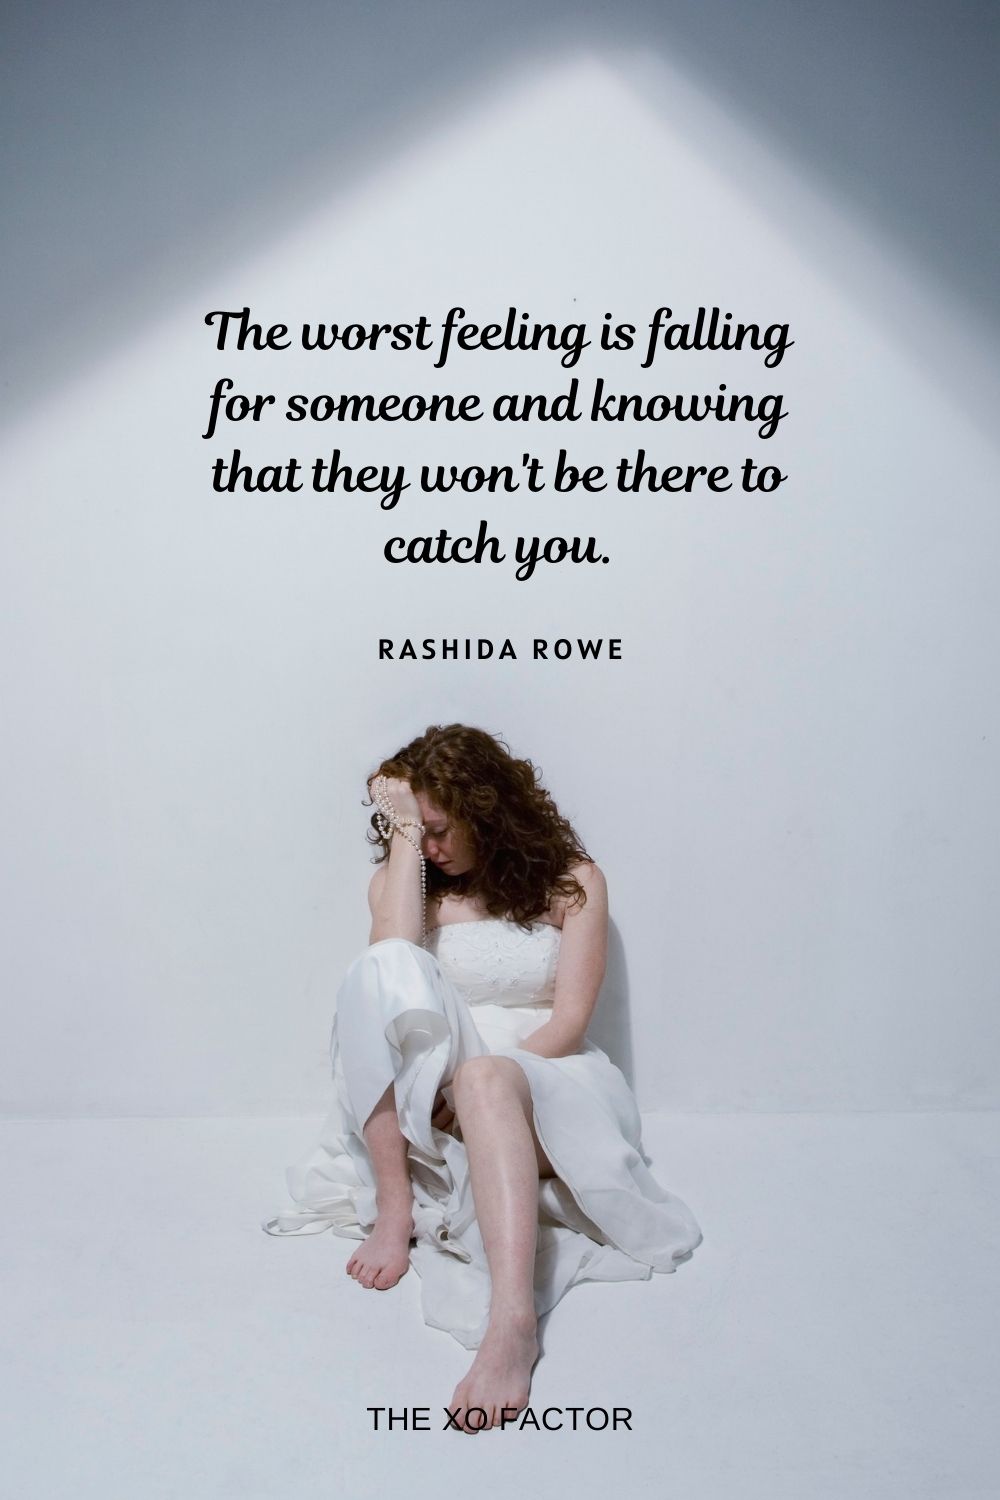 The worst feeling is falling for someone and knowing that they won't be there to catch you. Rashida Rowe